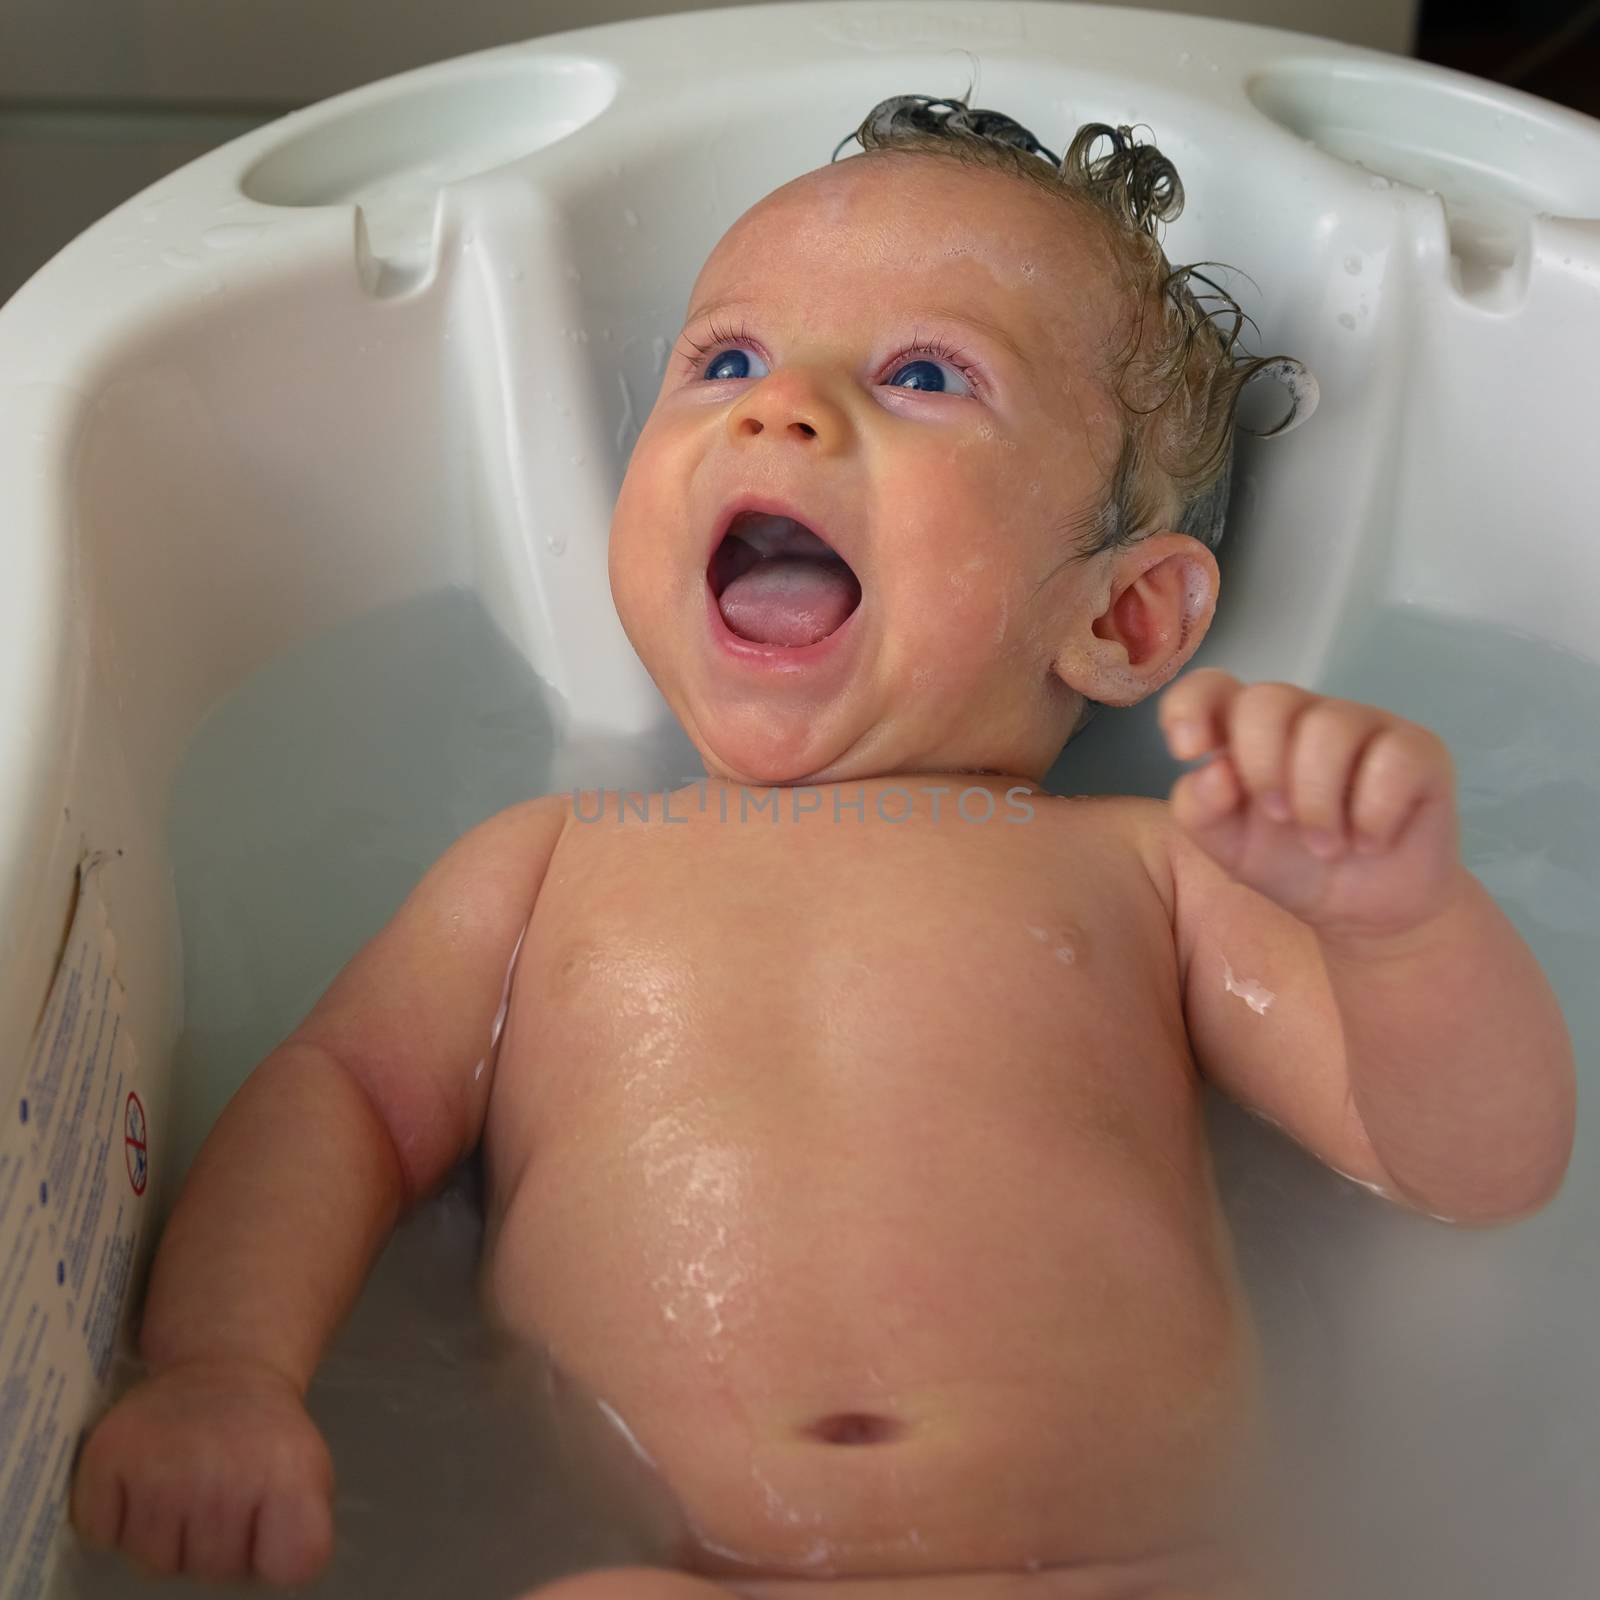 Newborn smiling while taking bath with foam and shampoo